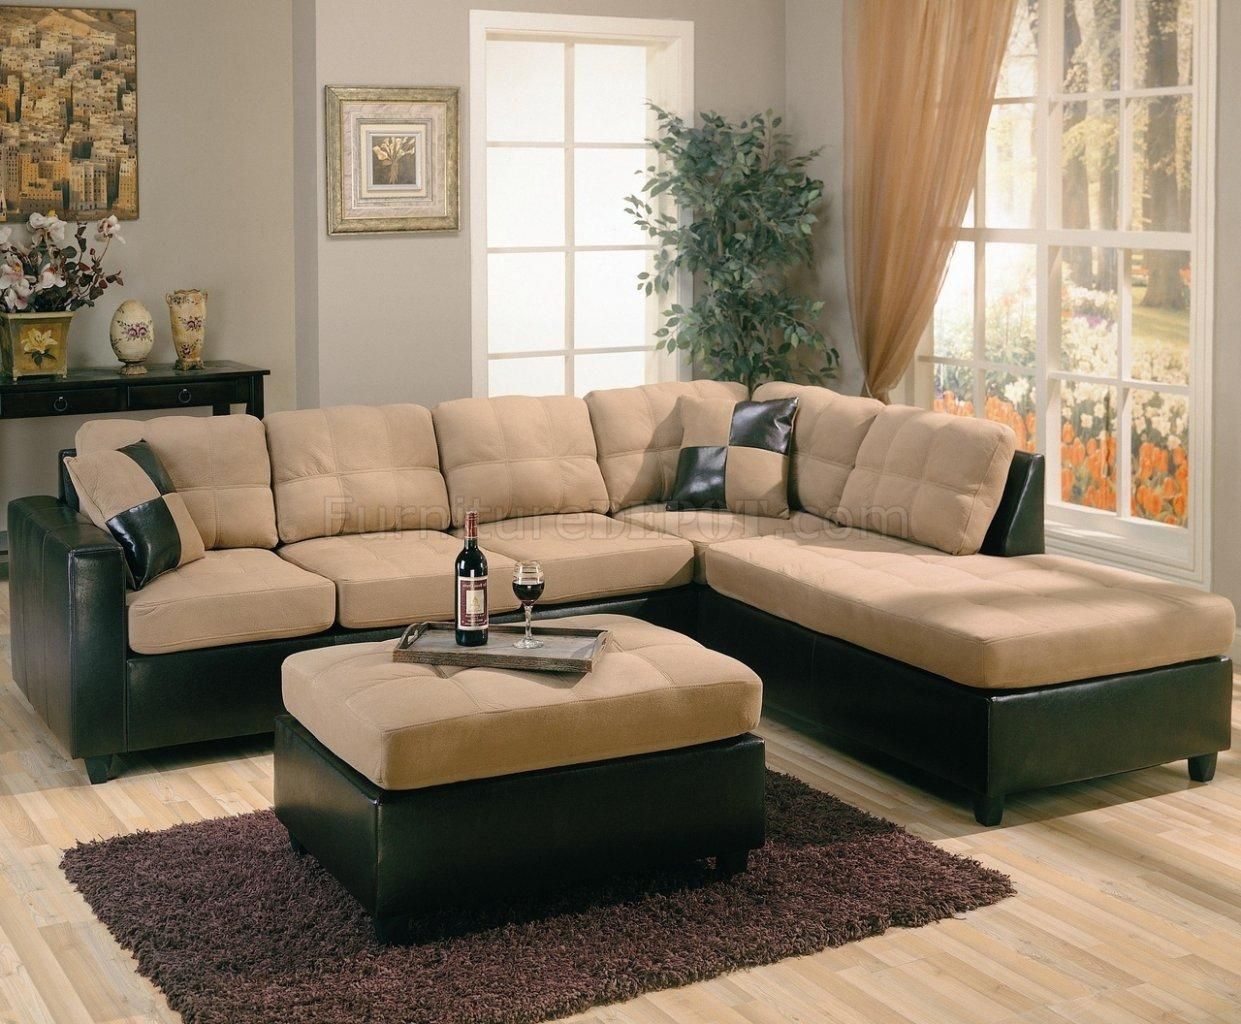 Sofa Fabric Sectionals Microfiber Sectional Sofas Microsuede Sofa Within Microsuede Sectional Sofas (View 9 of 20)